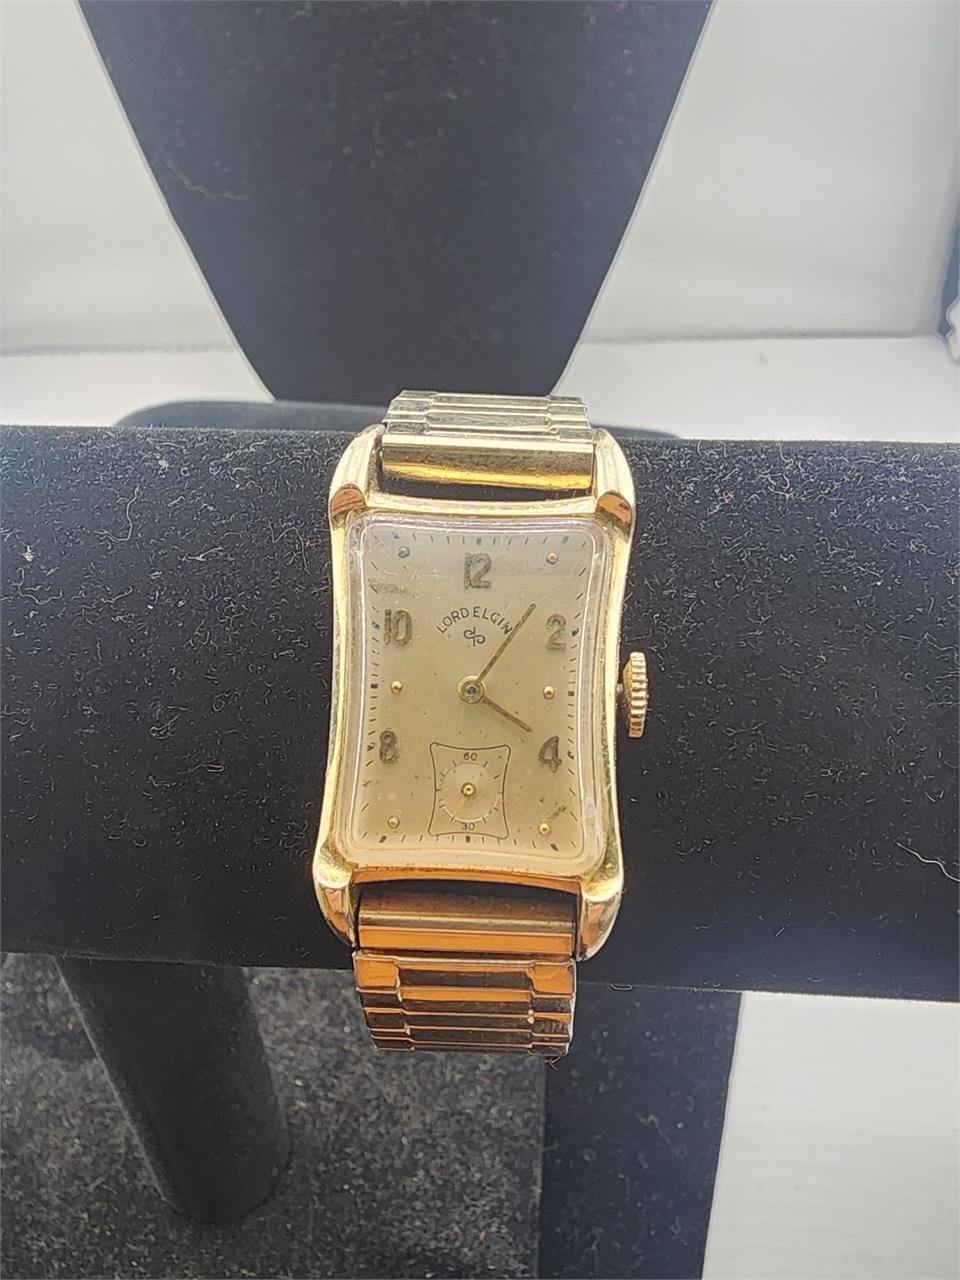 Gold Filled Lord Elgin Watch Parts